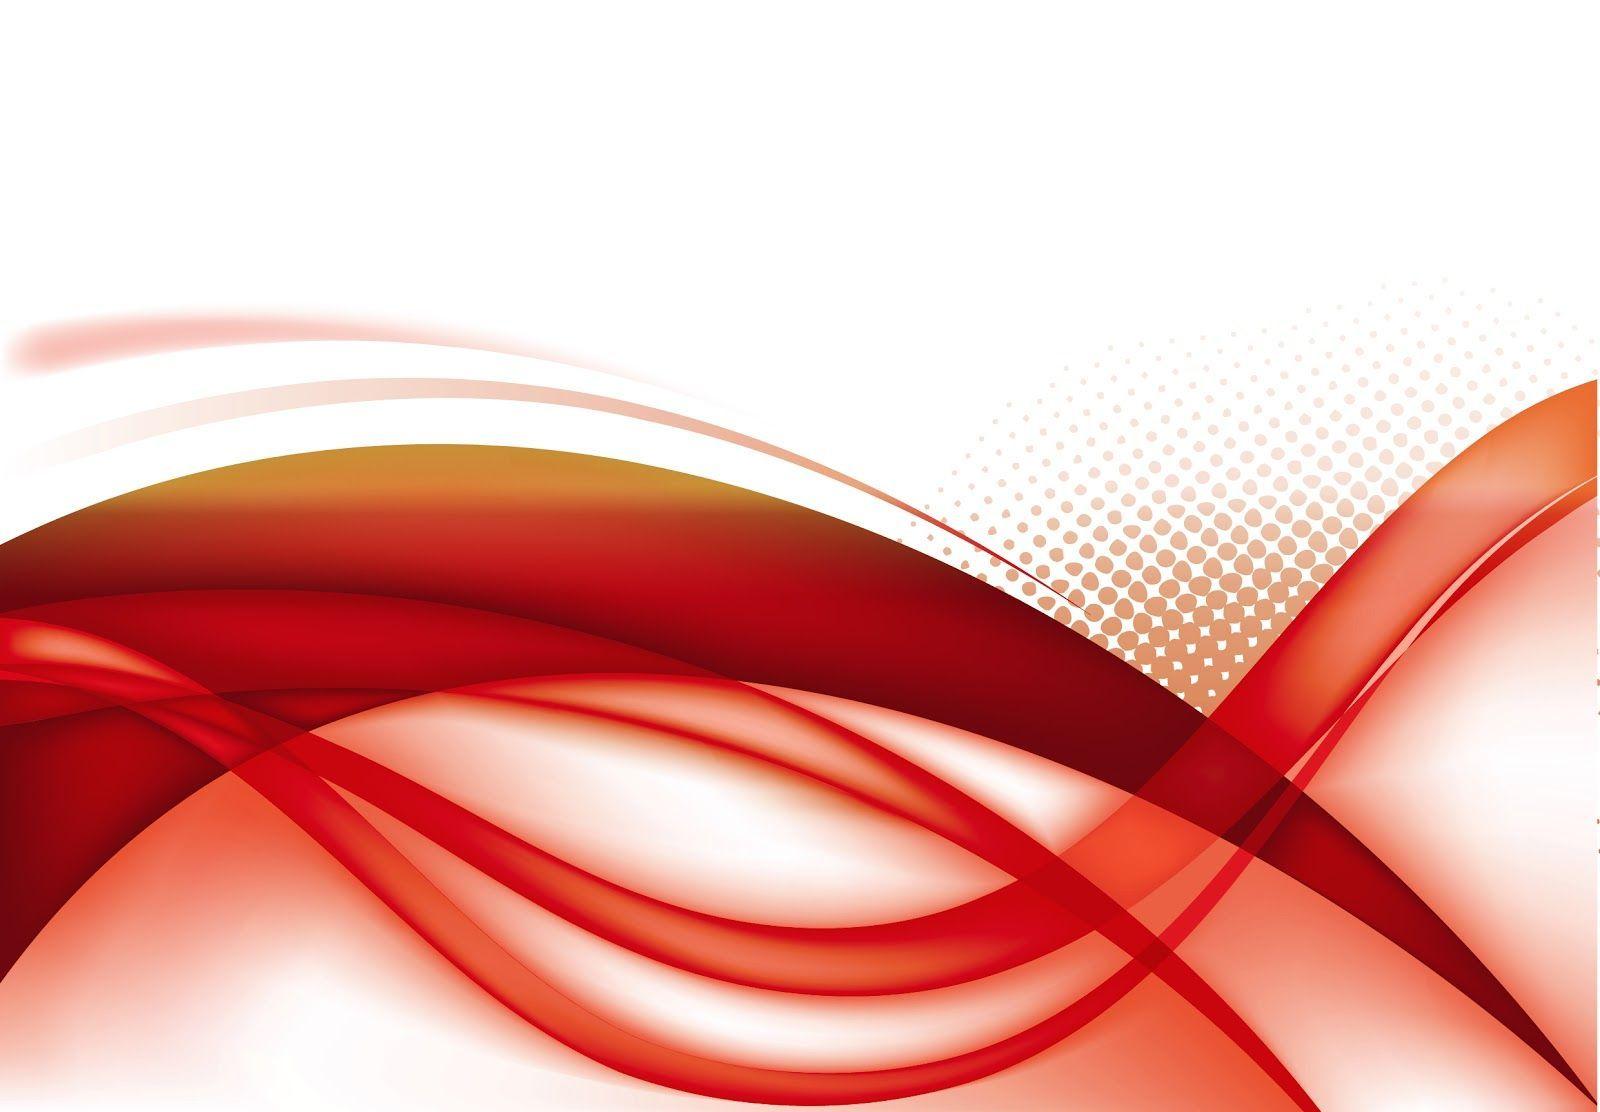 Red And White Abstract Backgrounds HD - Wallpaper Cave